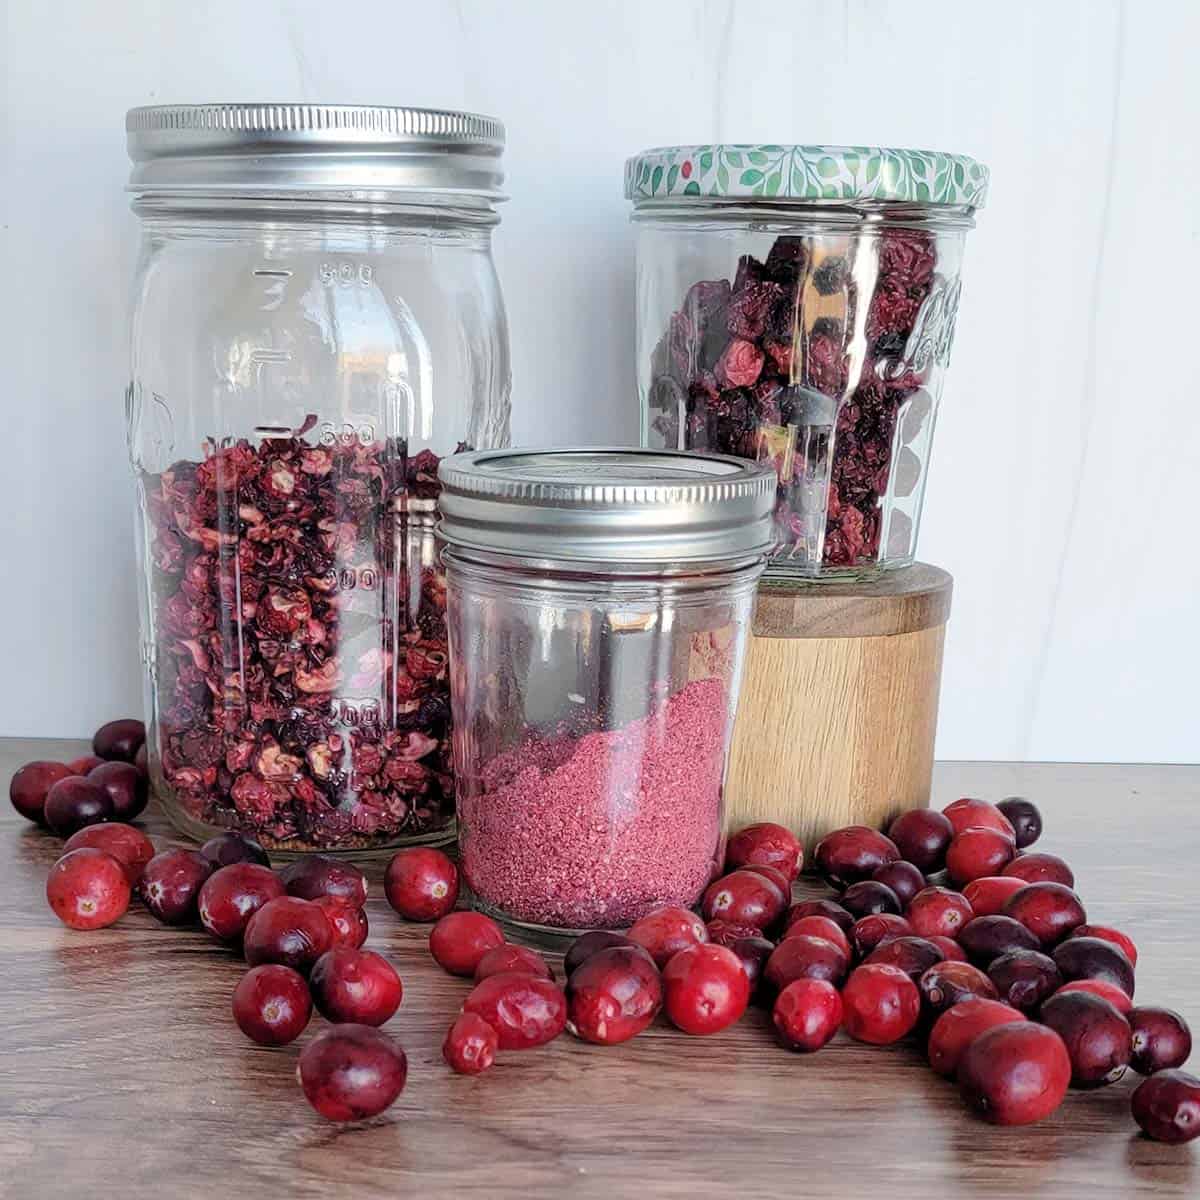 How to Dehydrate Cranberries and DIY Craisins